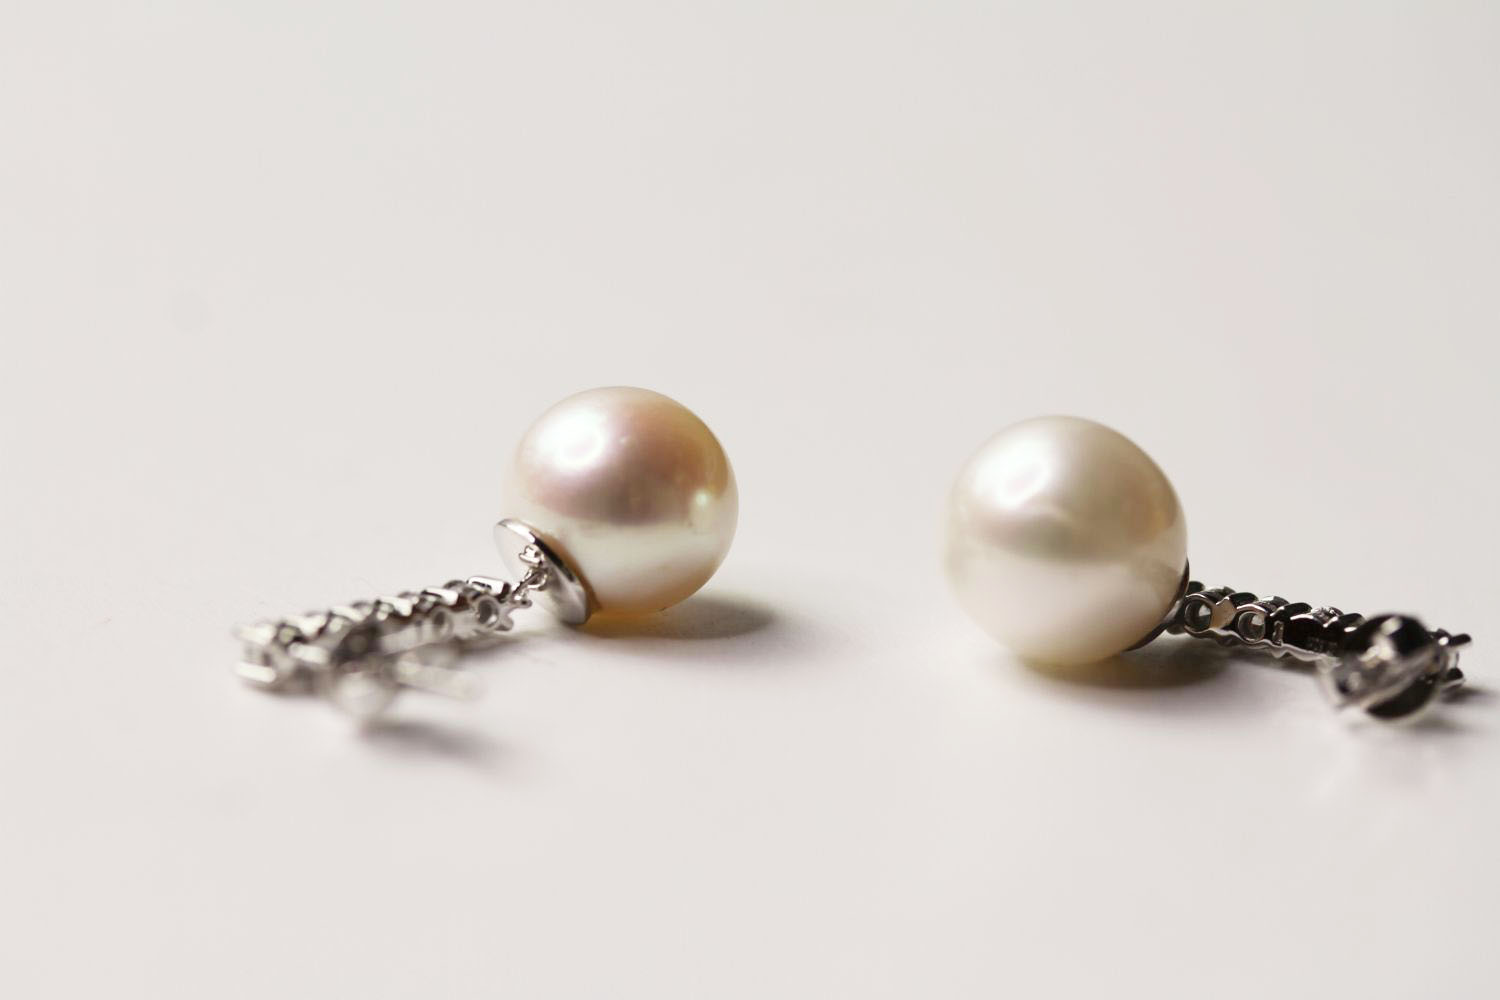 Pair Of Pearl & Diamond Earrings, set with 2 round cultured pearls, 10 round brilliant cut - Image 5 of 5